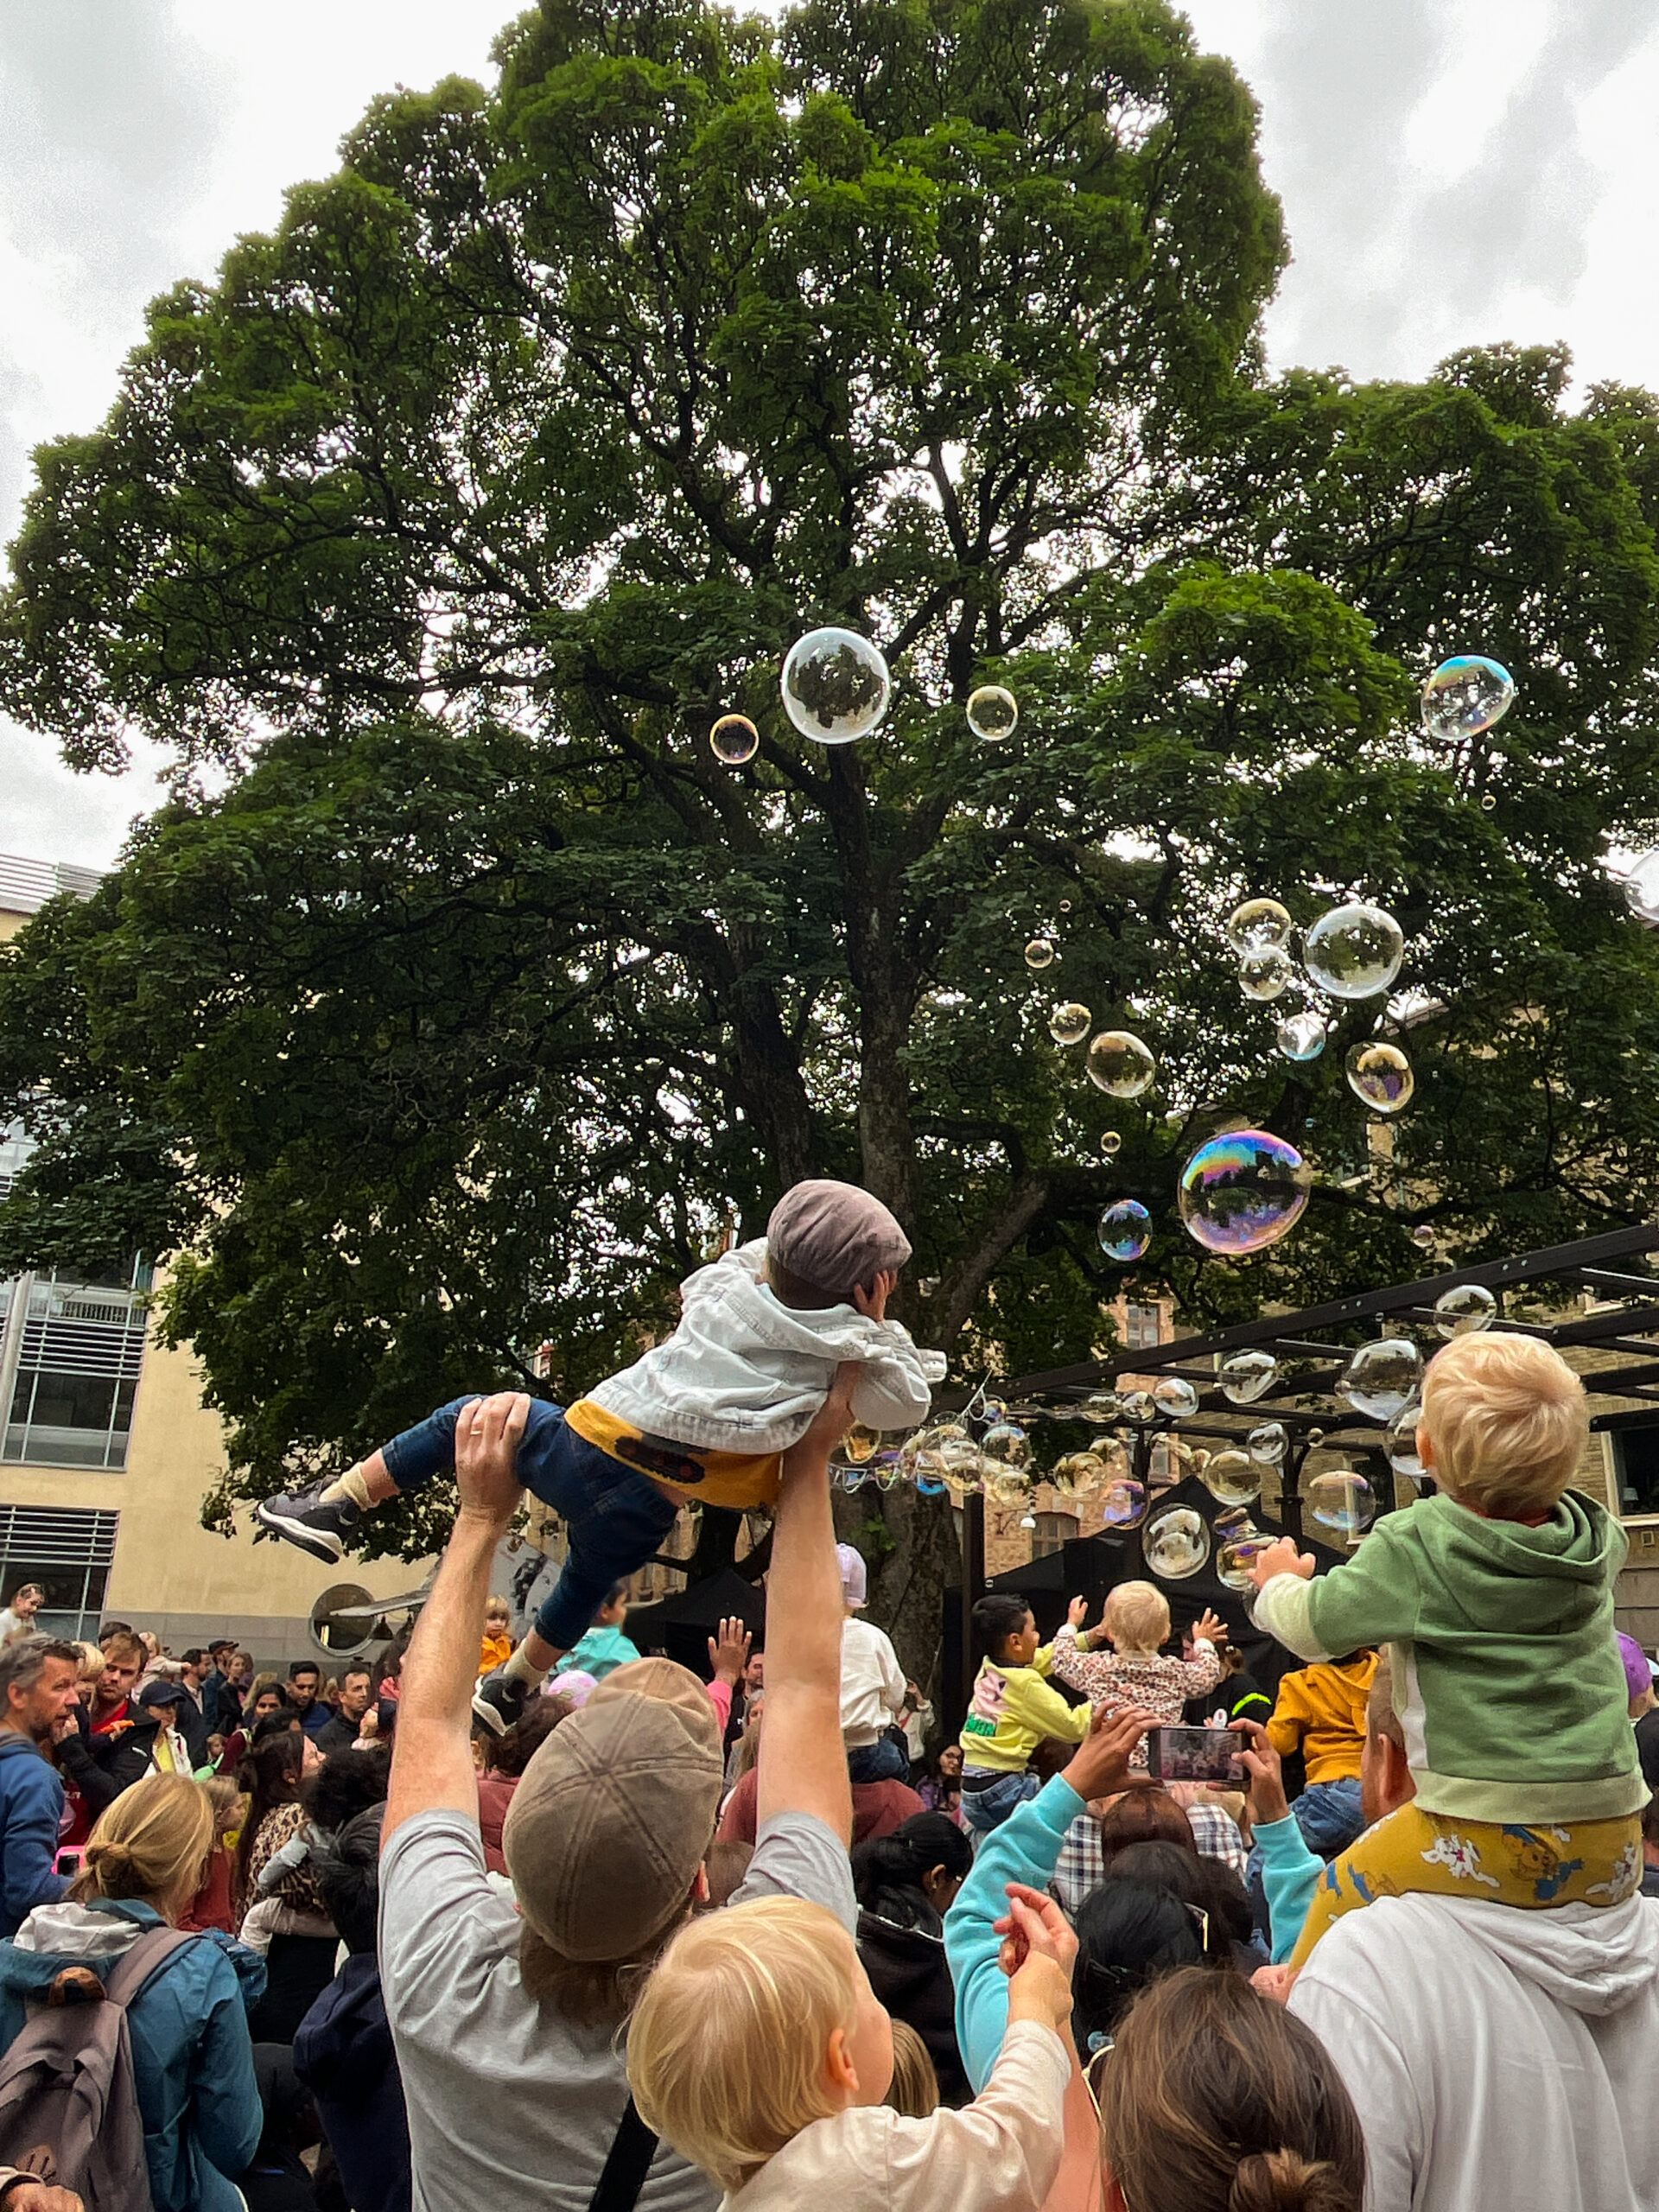 The focus of the photo is on a person holding up a small child who is reaching for large soap bubbles. In the background you can see a large green tree and lots of children and adults enthusiastically looking at soap bubbles.